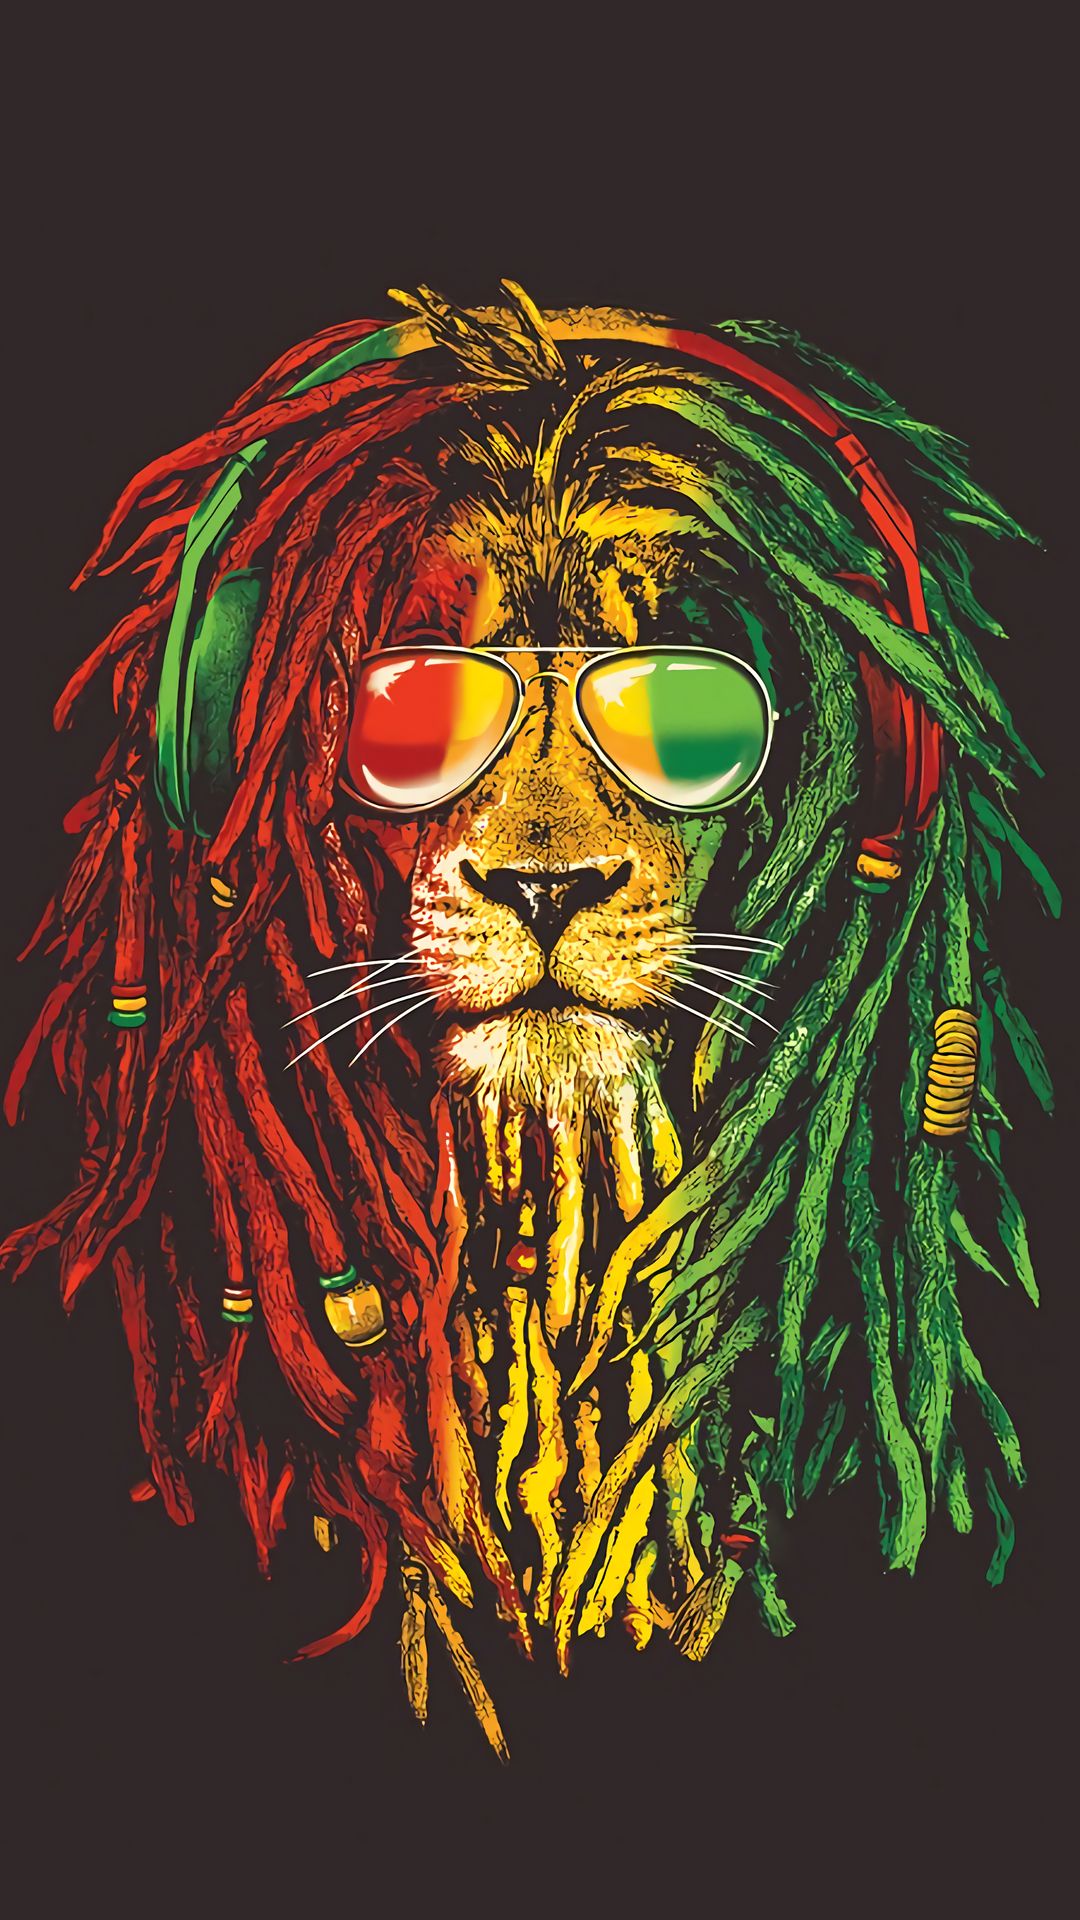 iPhone wallpaper by me None but ourselves Bob Marley 680x1024   rQuotesPorn